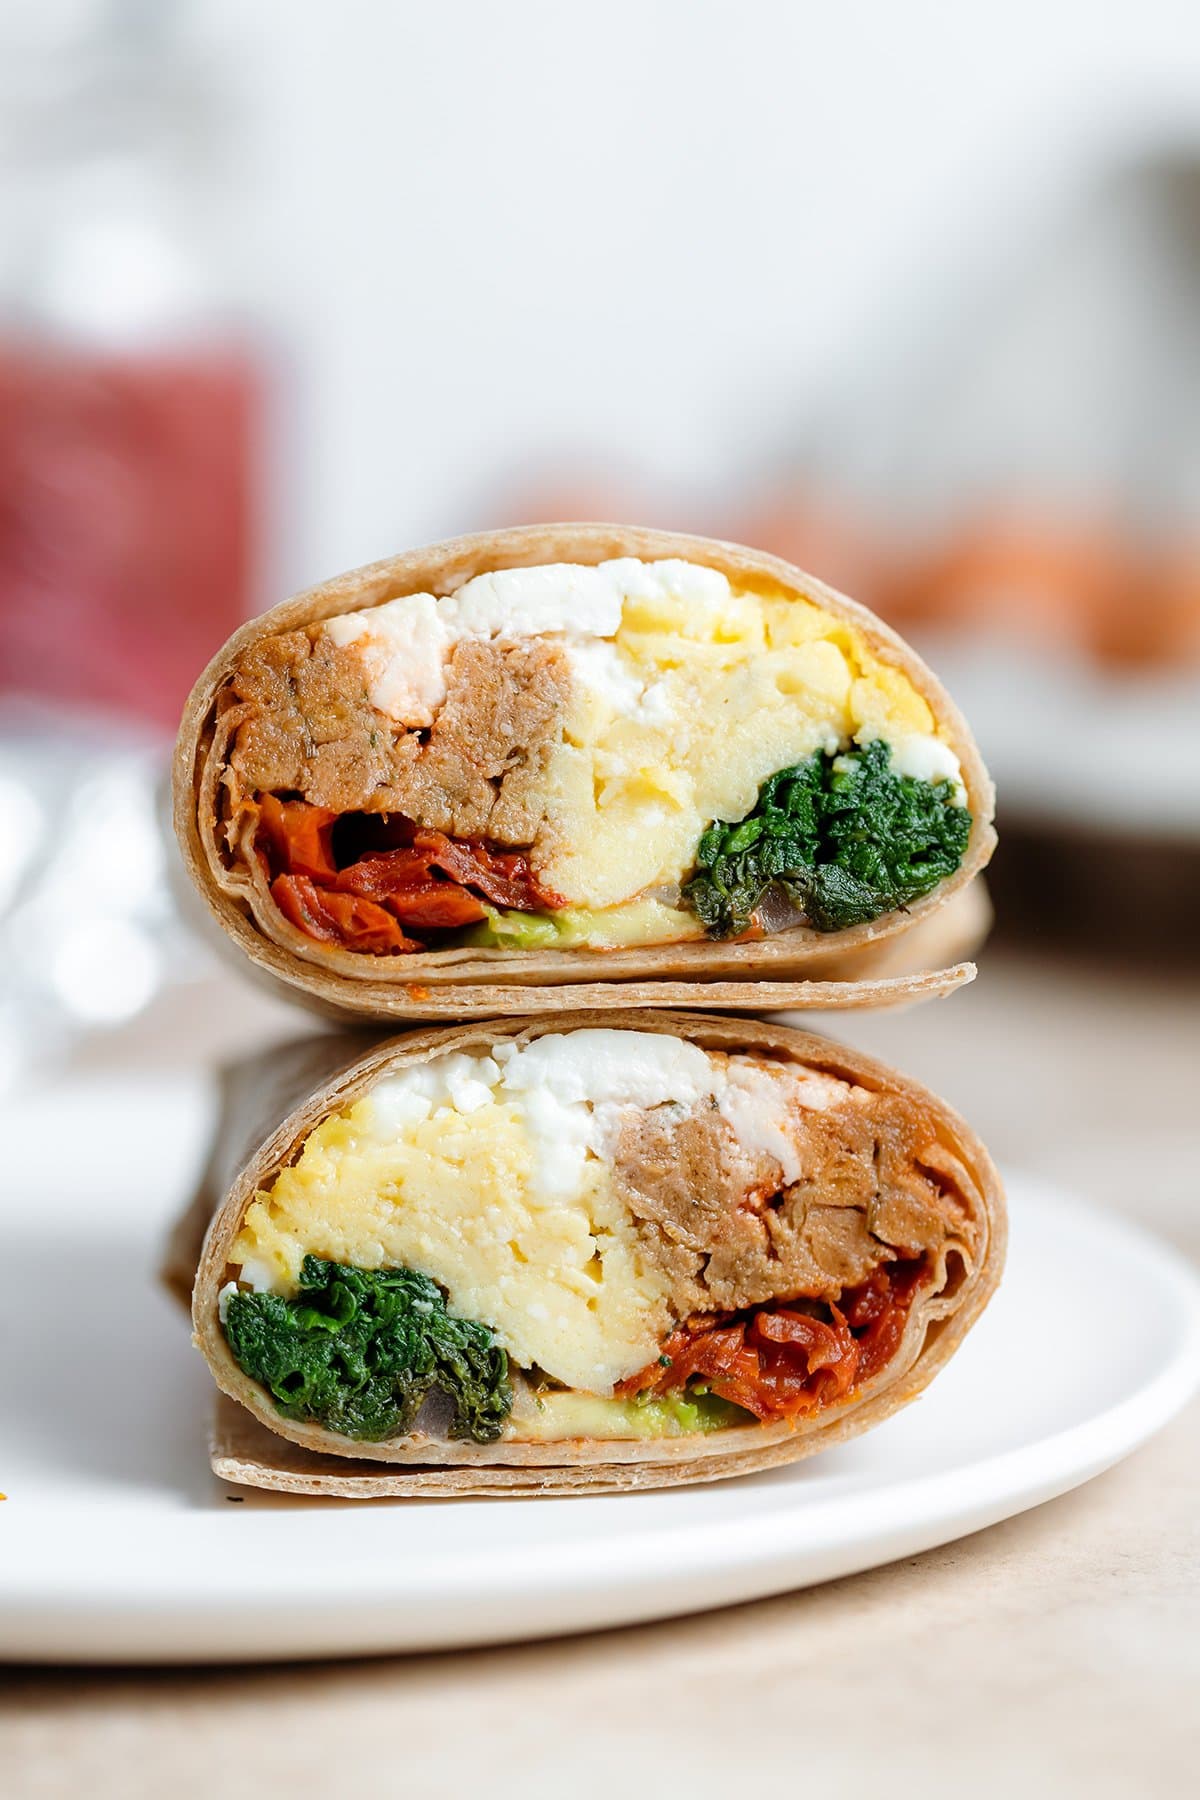 A breakfast burrito cut in half showing eggs, spinach, and sausage inside on a white plate.